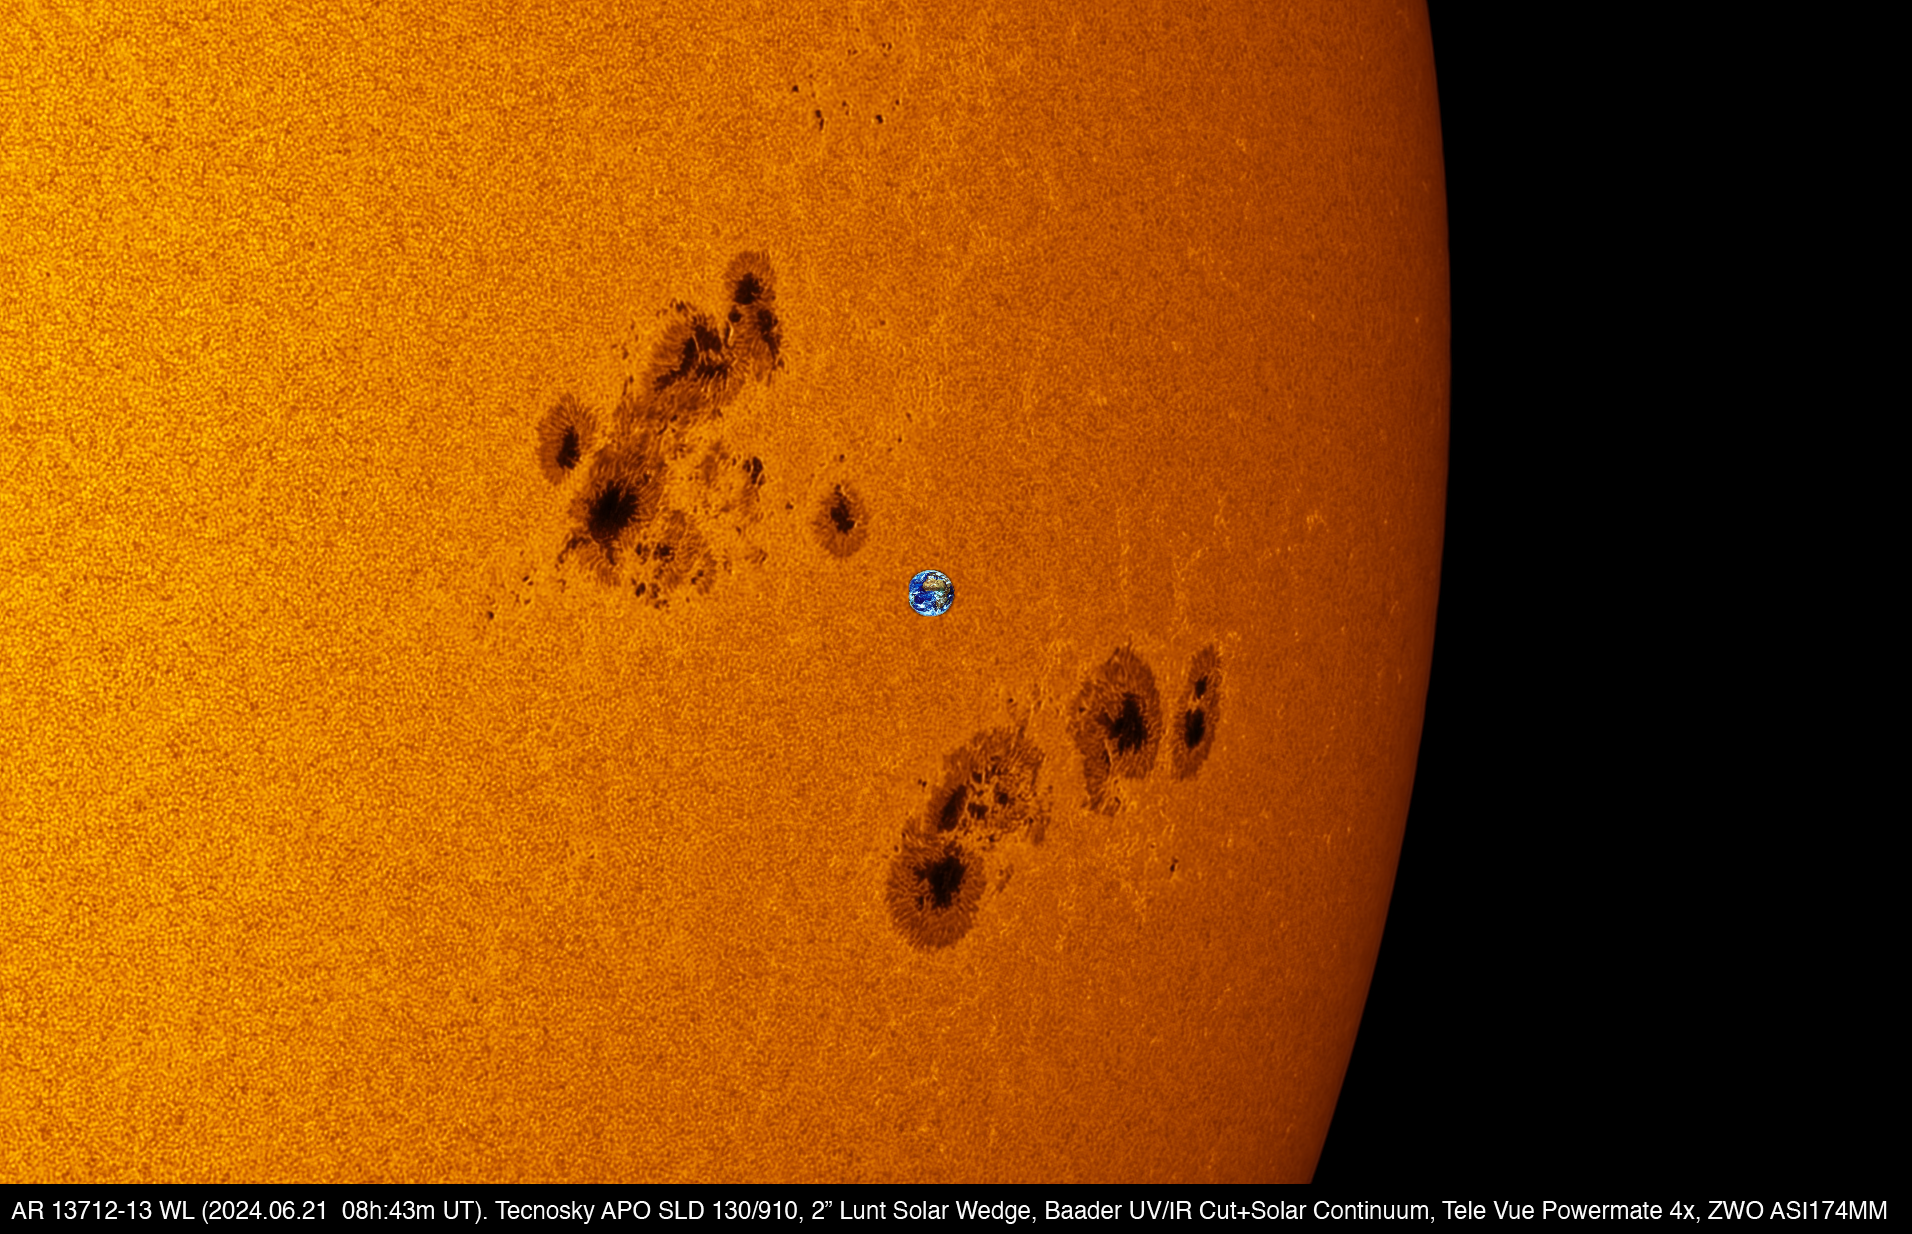 AR 13712 and 13713 on the summer solstice day